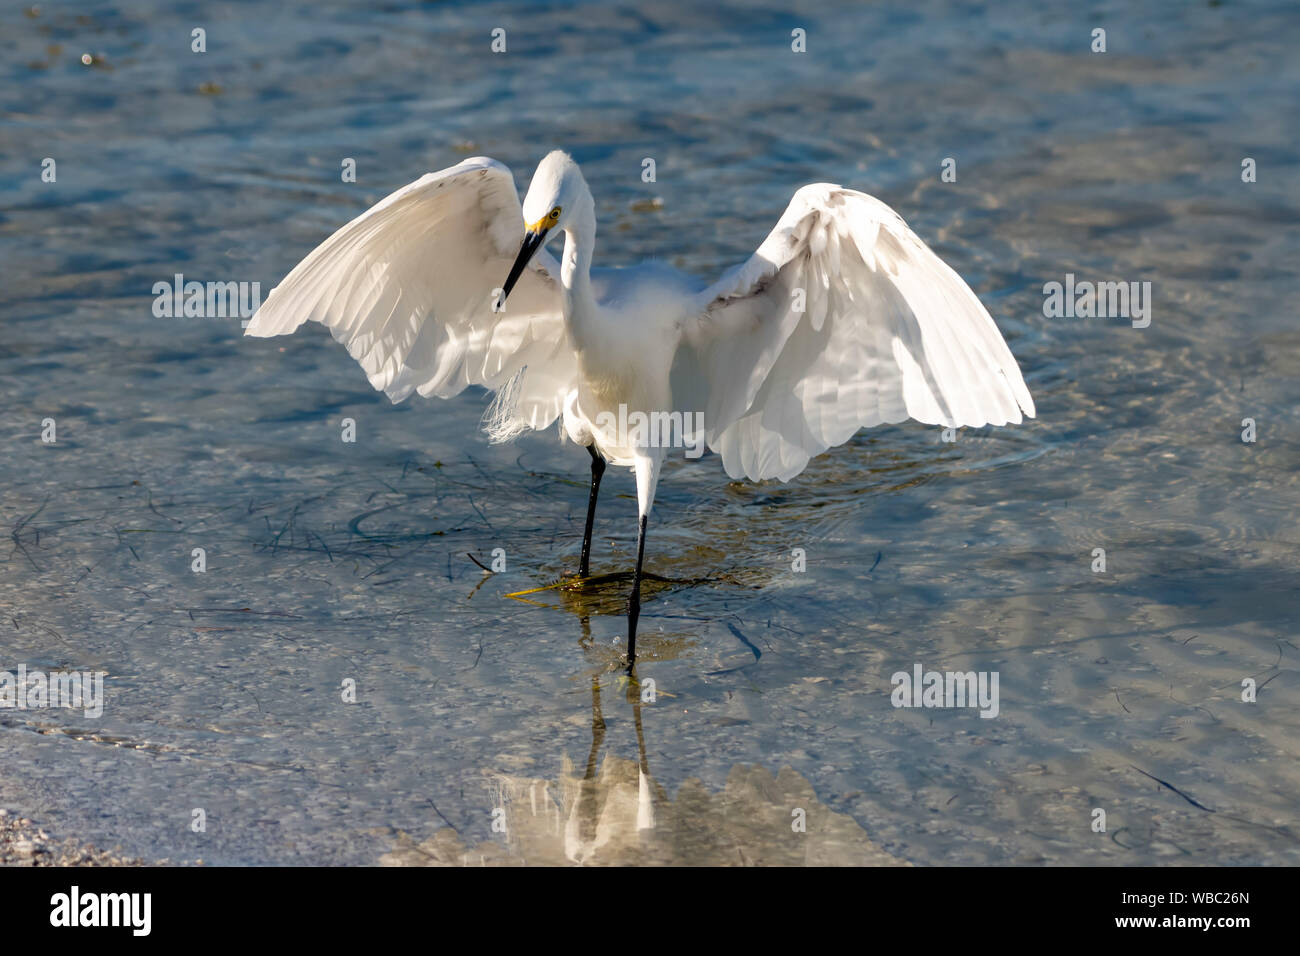 Shore bird - Snowy egret hunting for food in the Gulf of Mexico - Florida Stock Photo